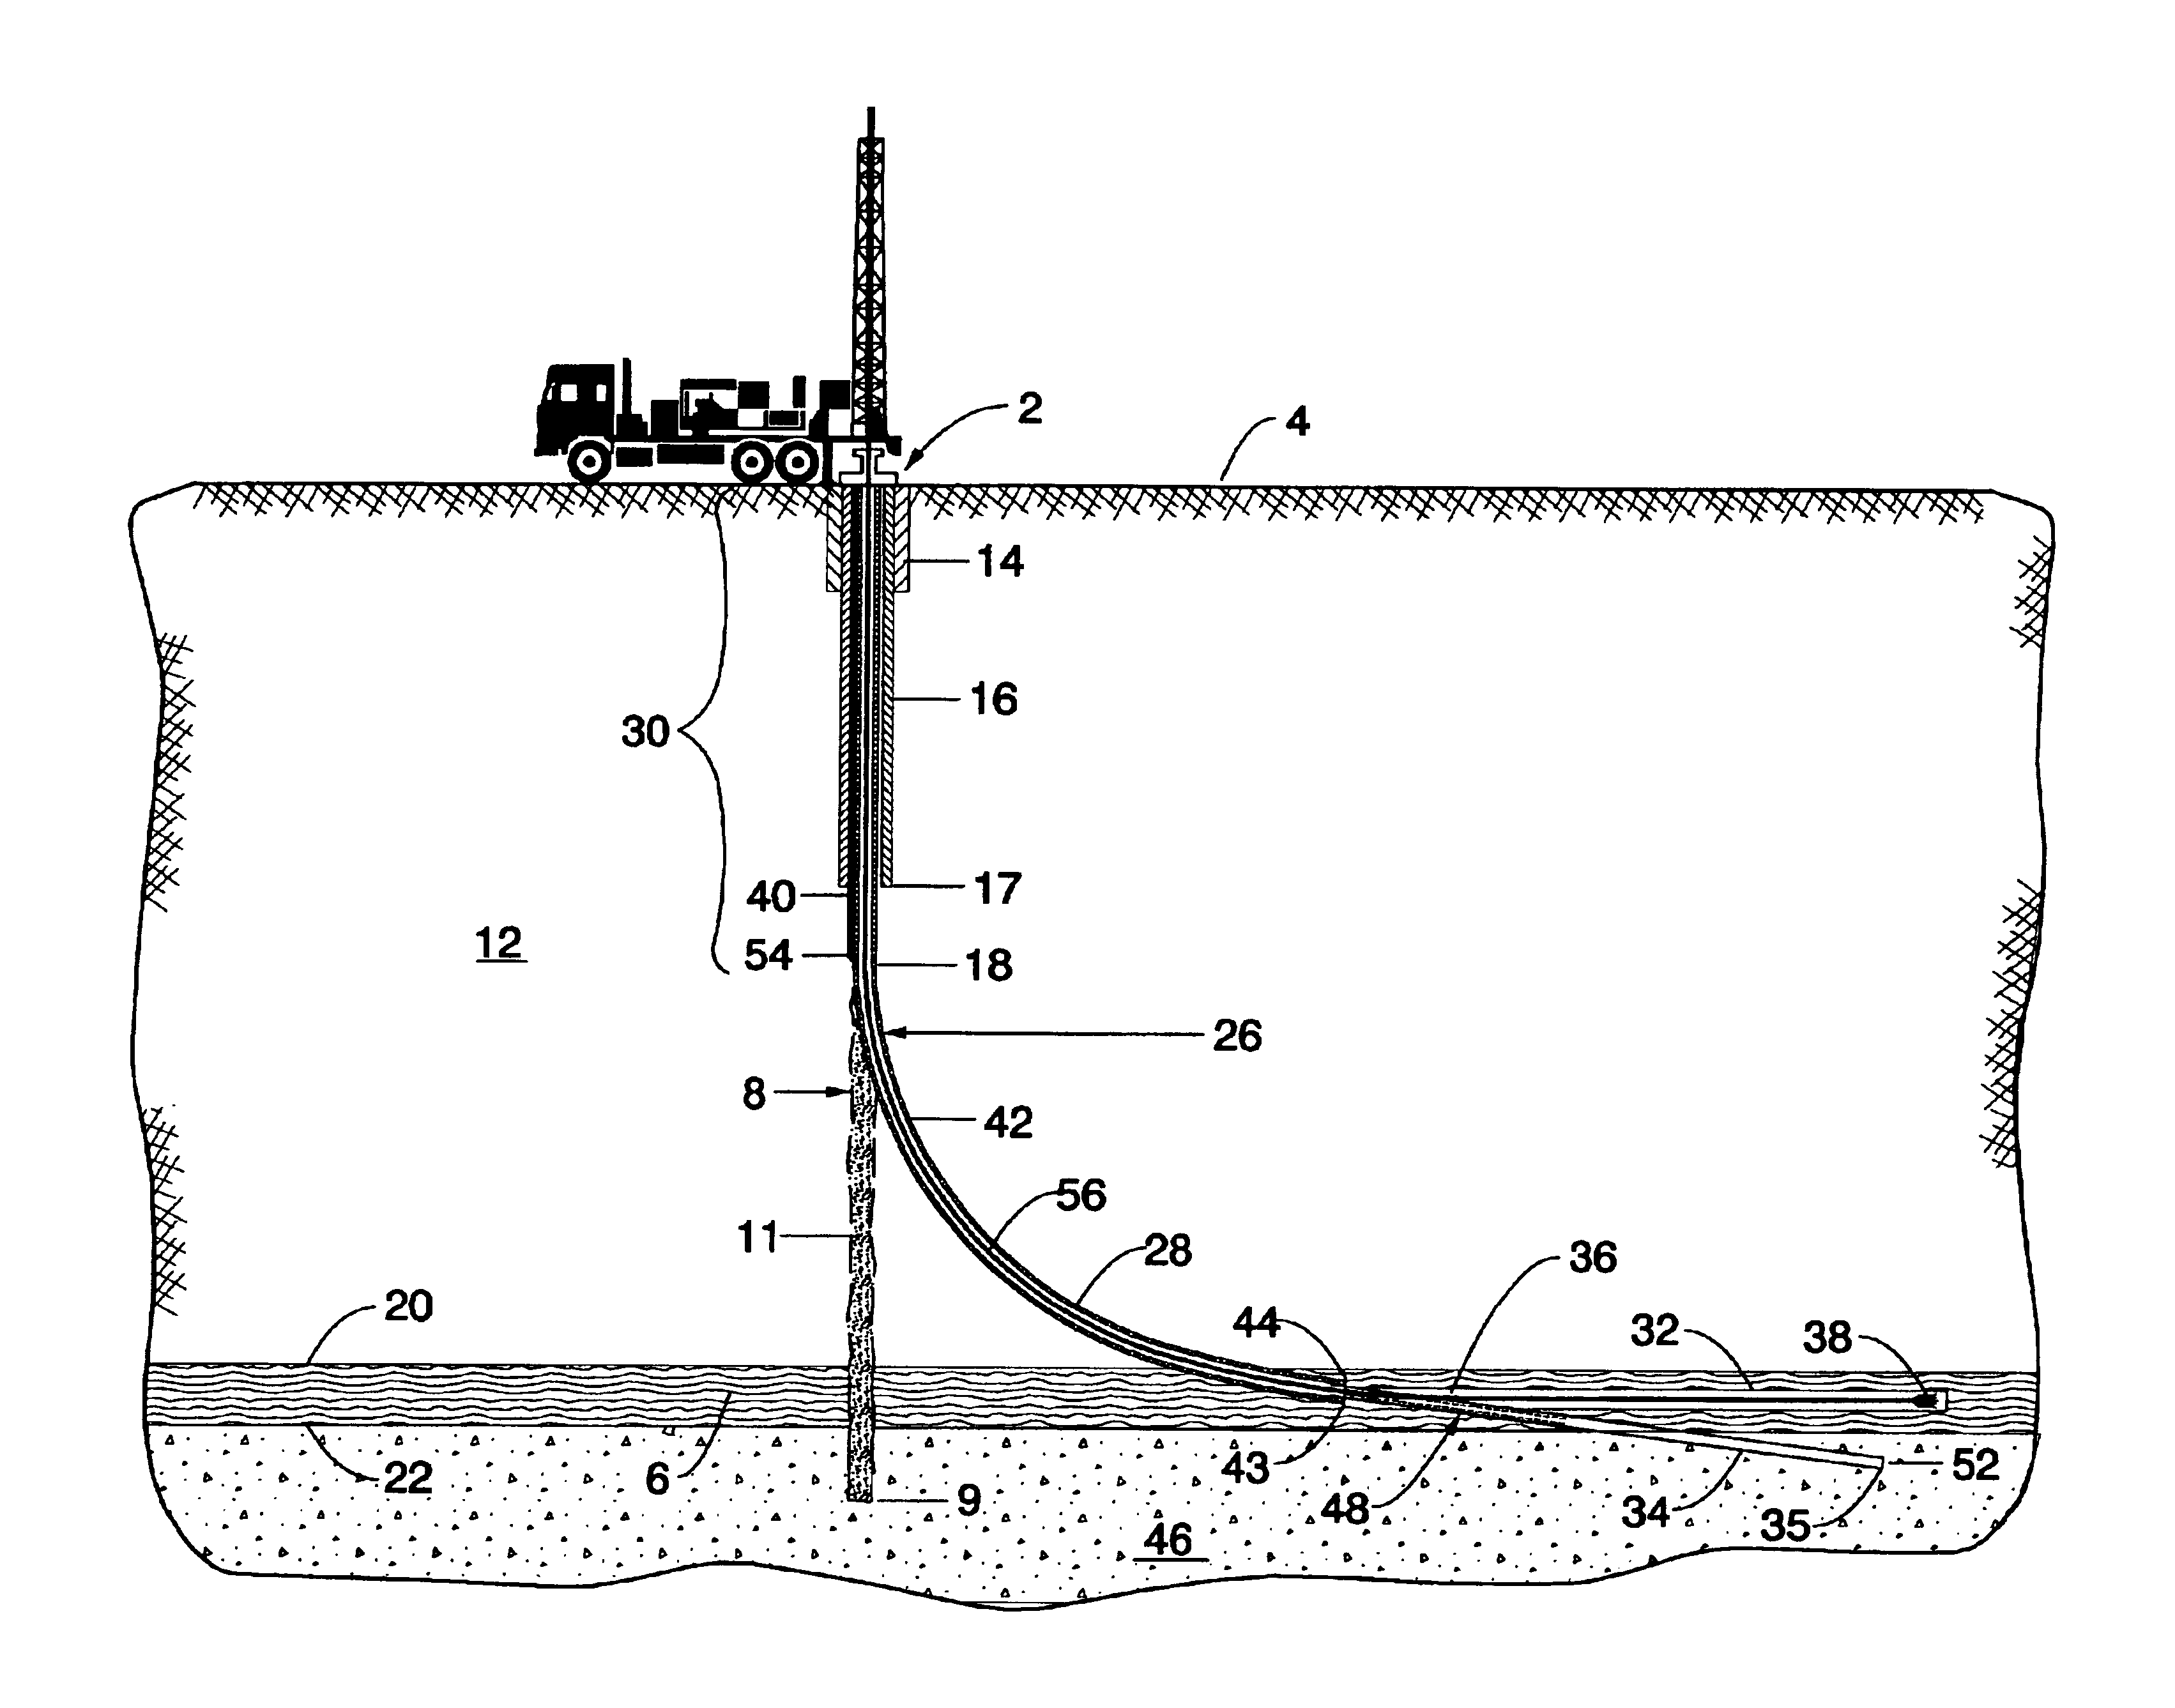 Method for making a well for removing fluid from a desired subterranean formation